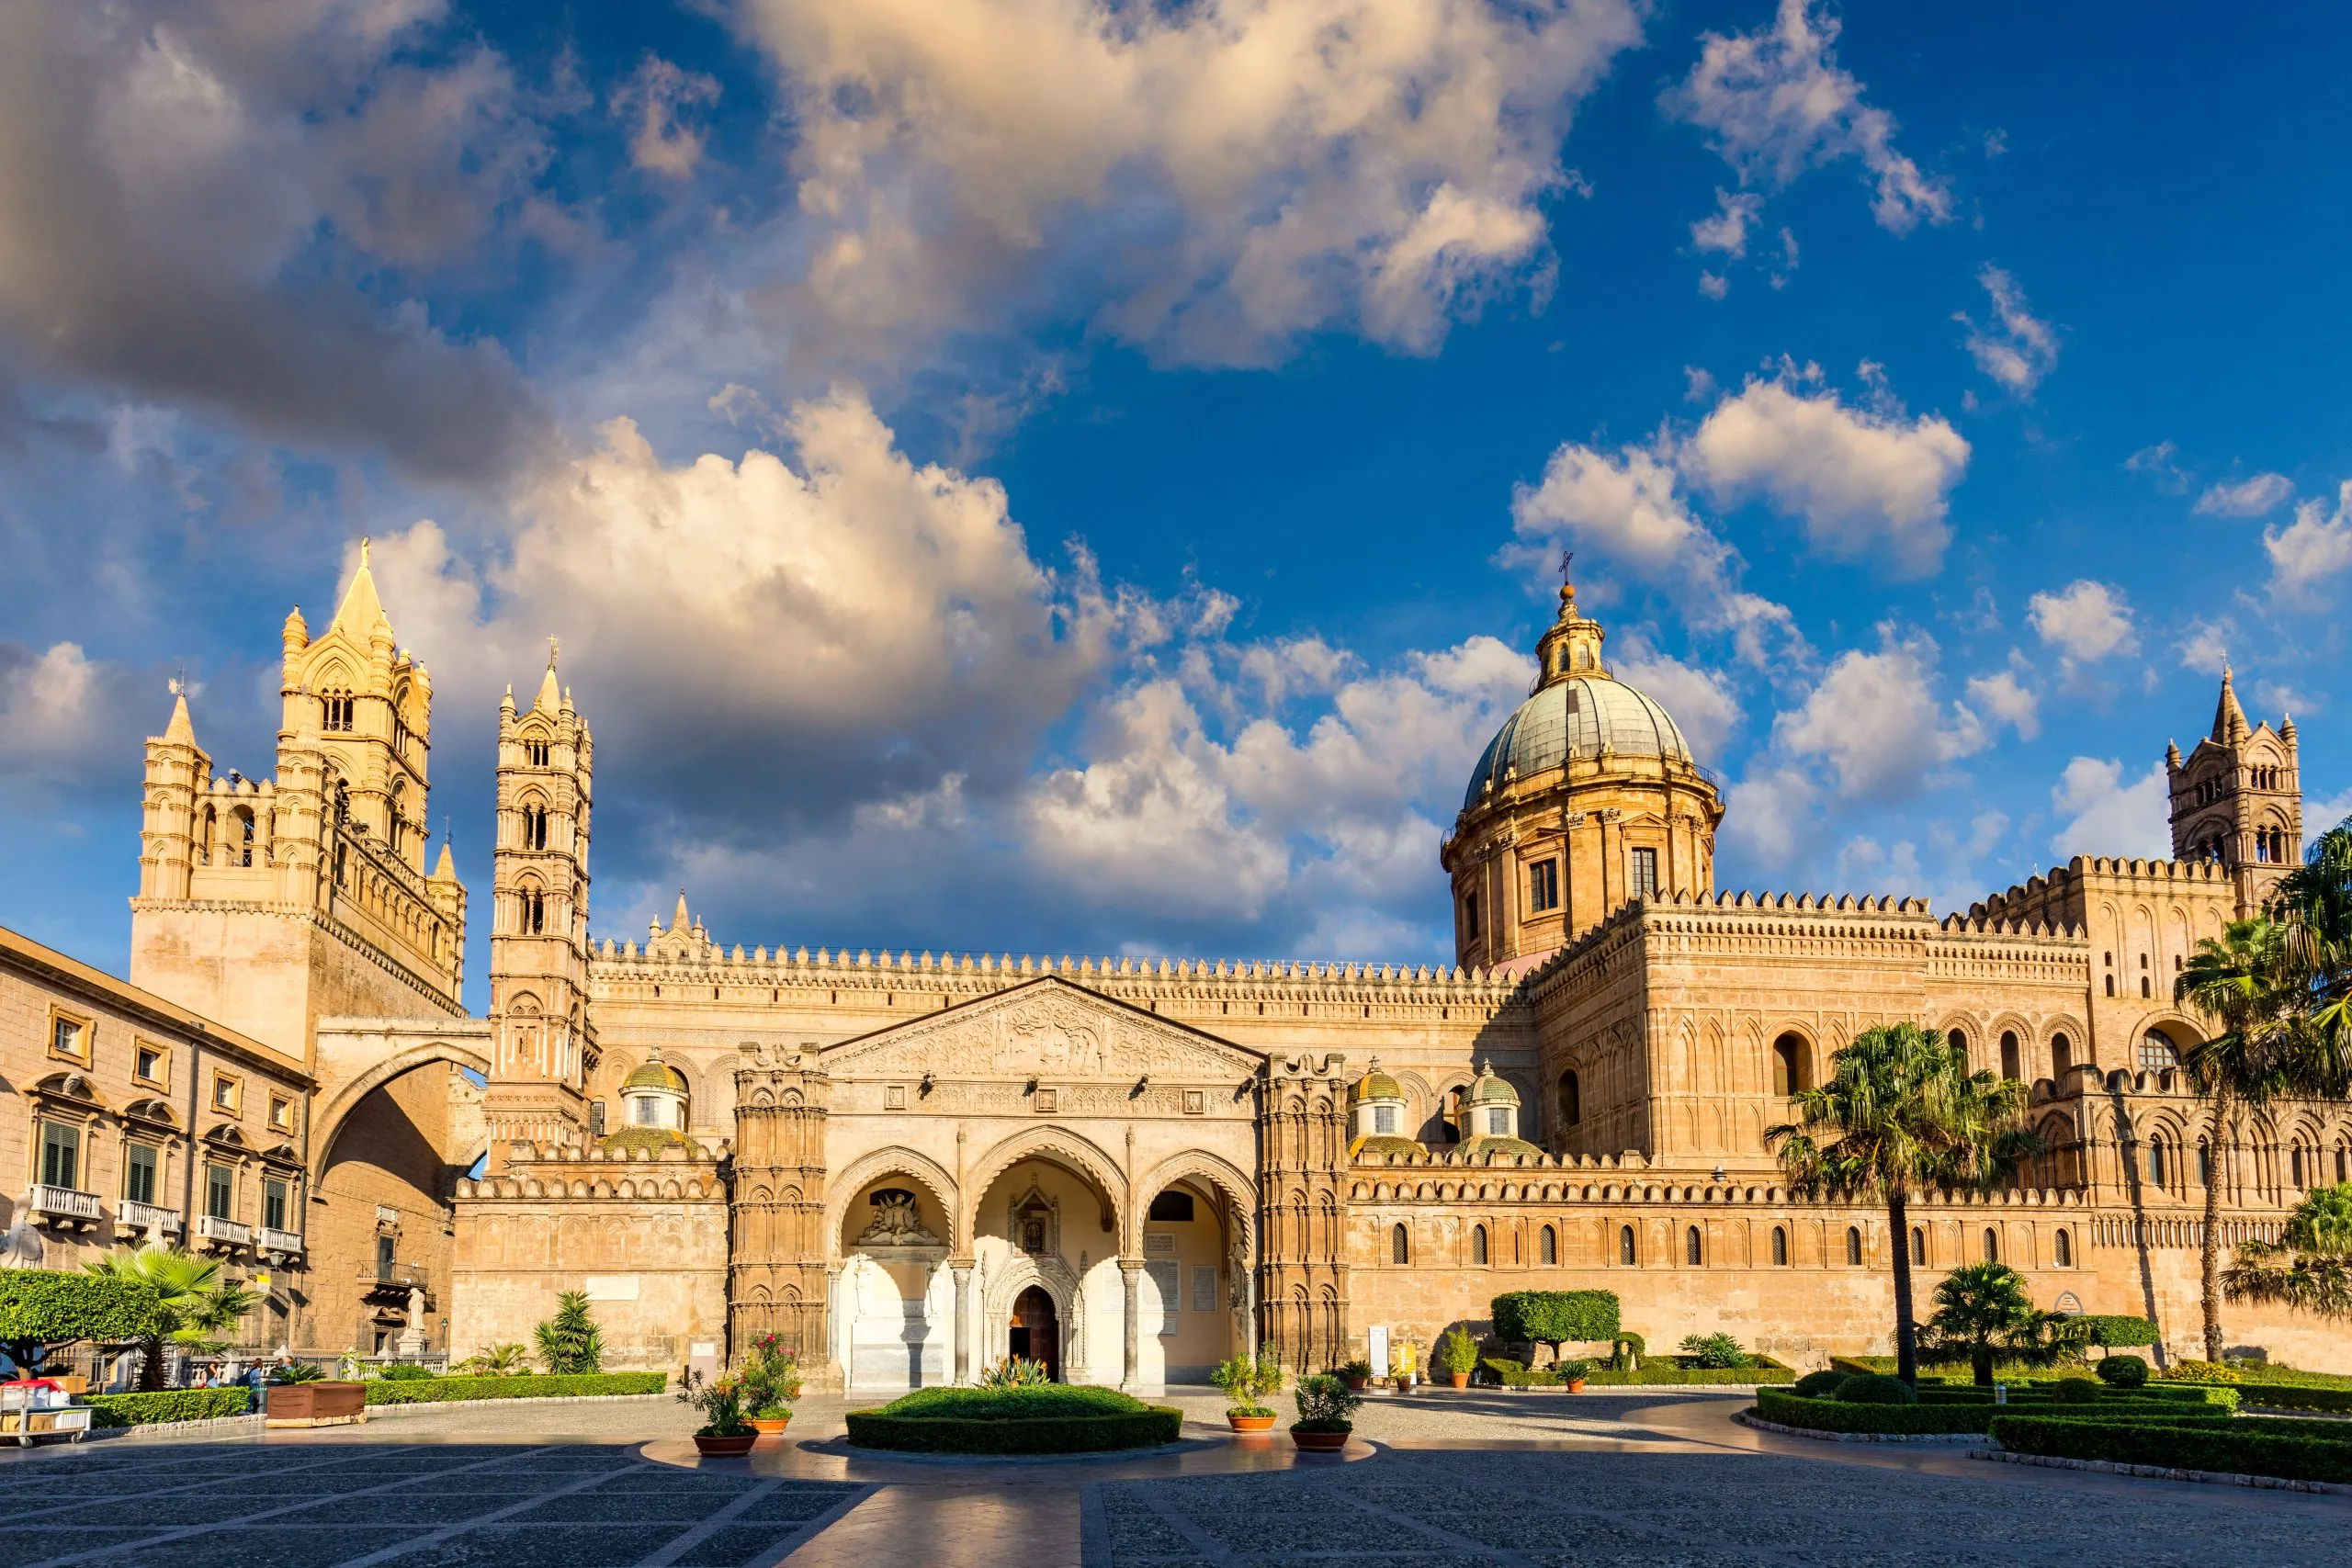 Palermo Cathedral in Palermo, Italy in a beautiful summer day. Palermo Cathedral is the cathedral church of the Roman Catholic Archdiocese of Palermo, located in Palermo, Sicily, Italy.